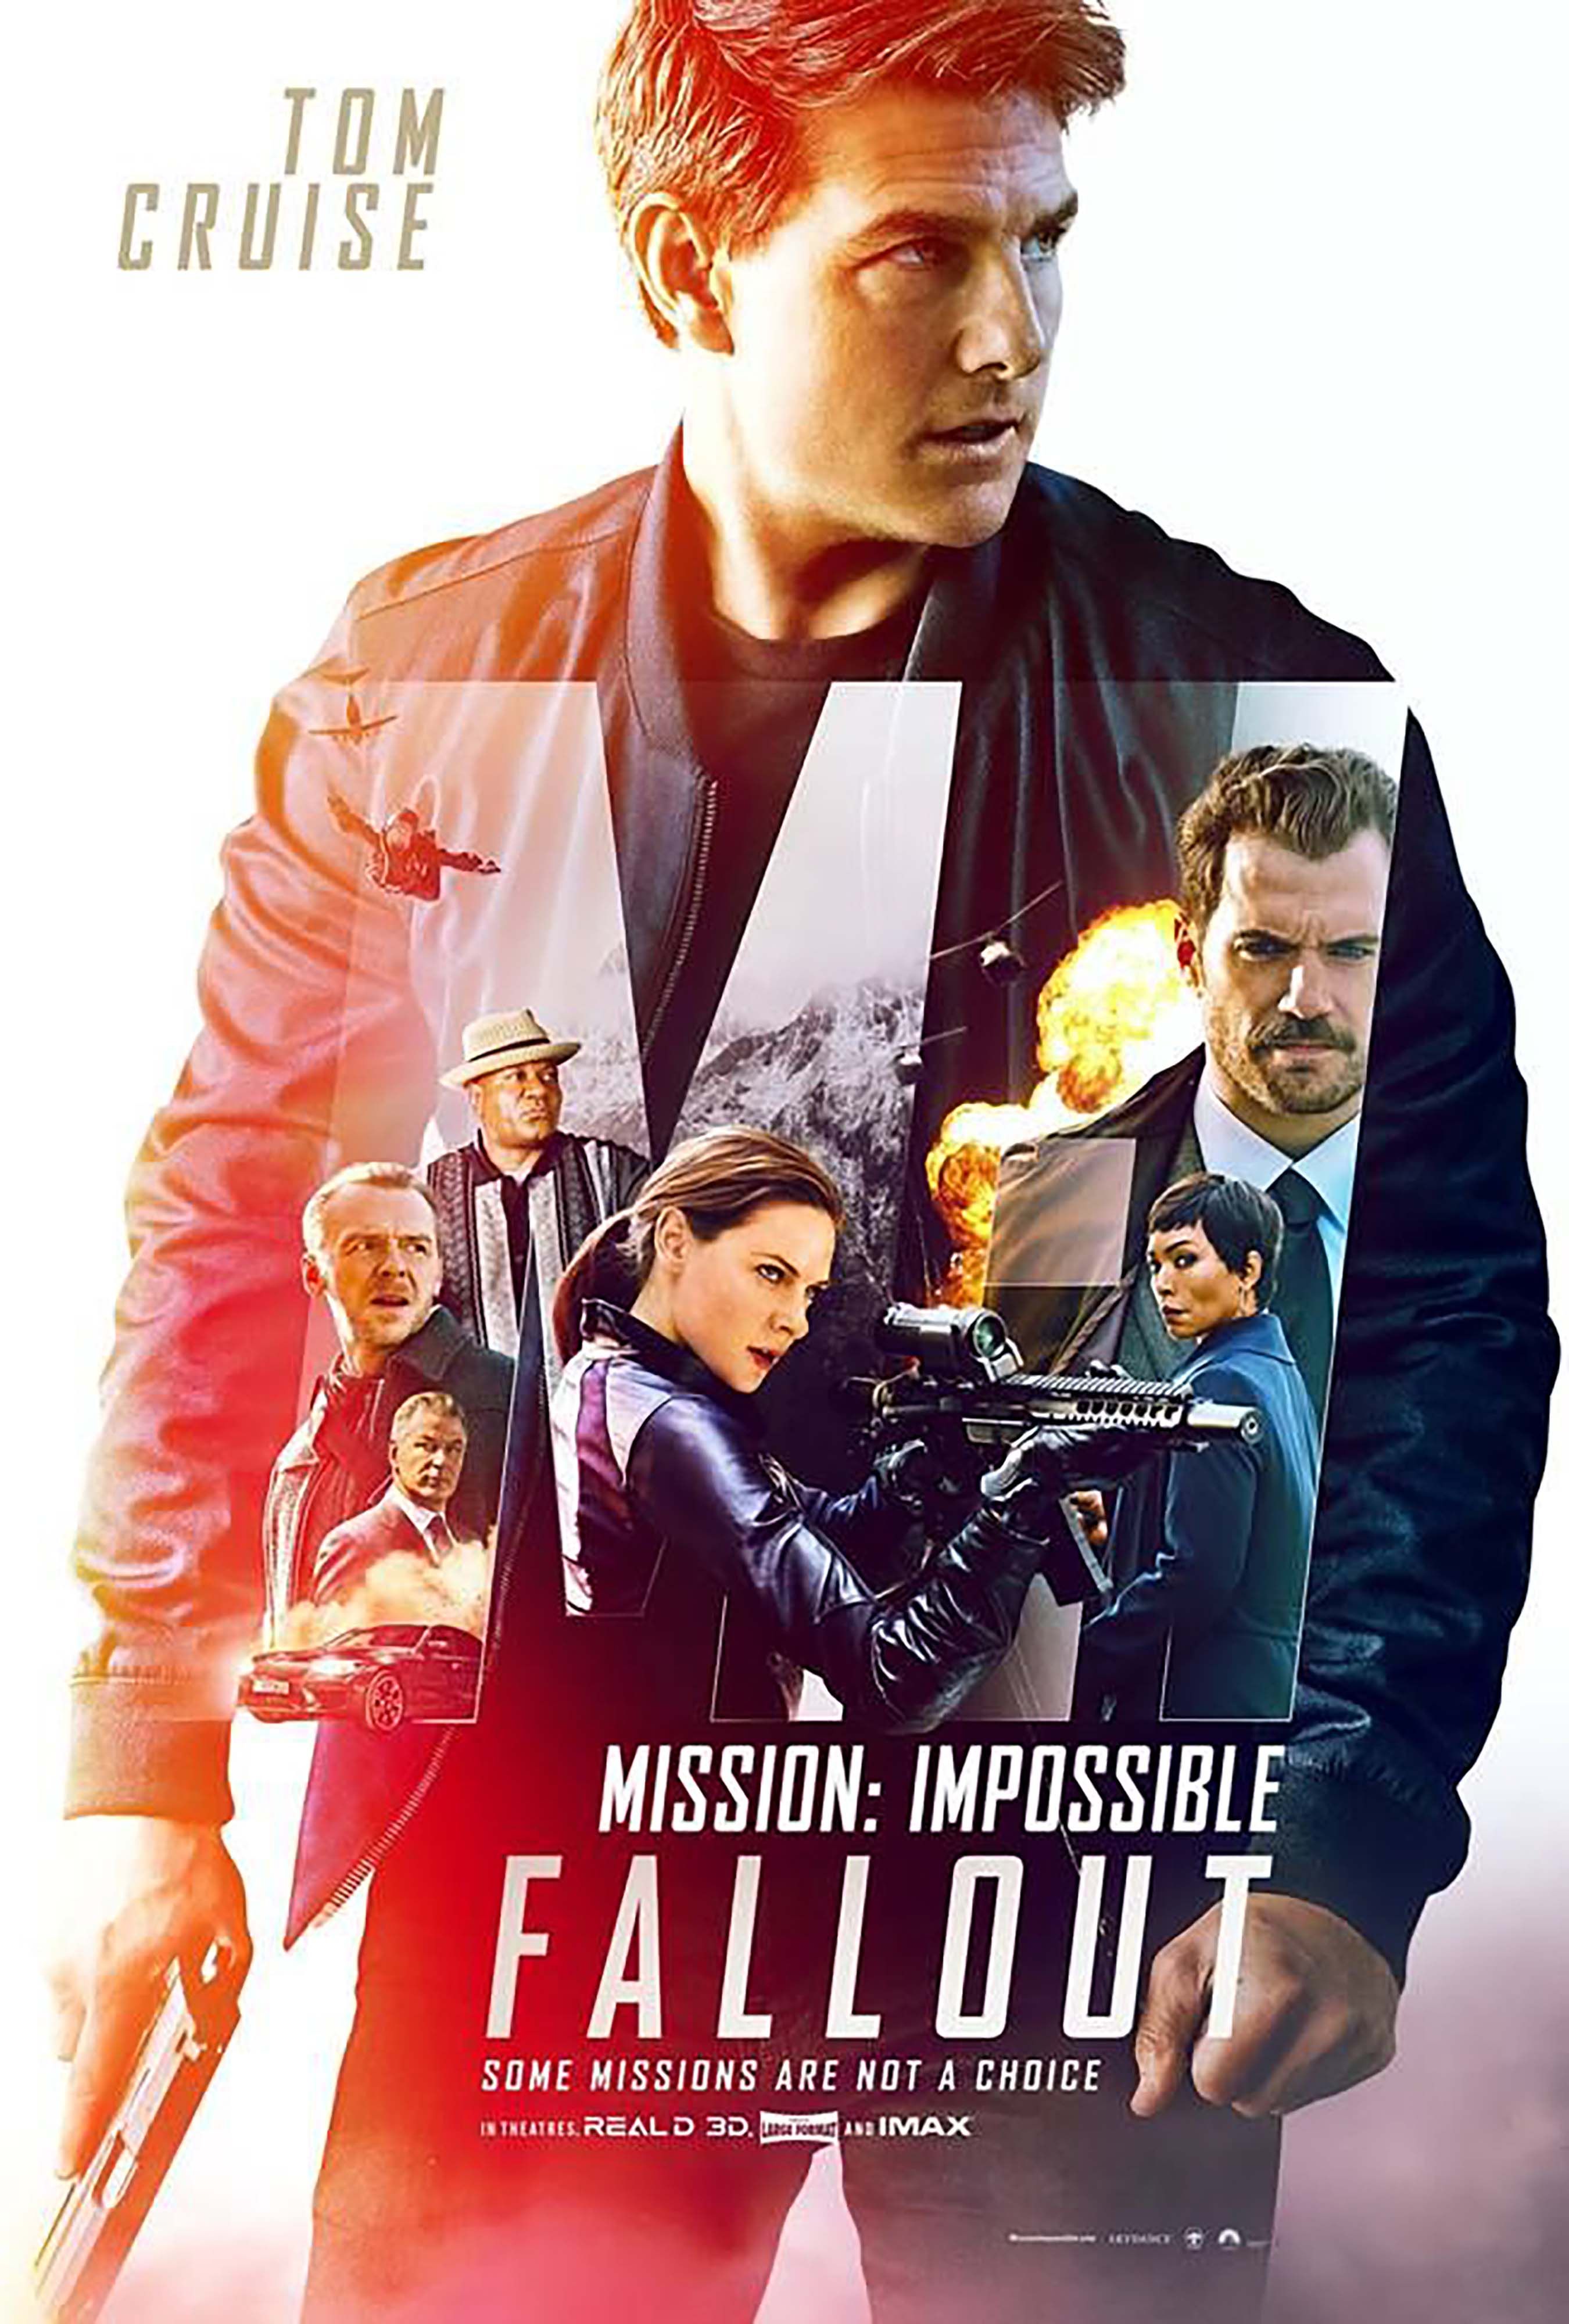 Mission: Impossible – Fallout (2018) ★★★☆☆